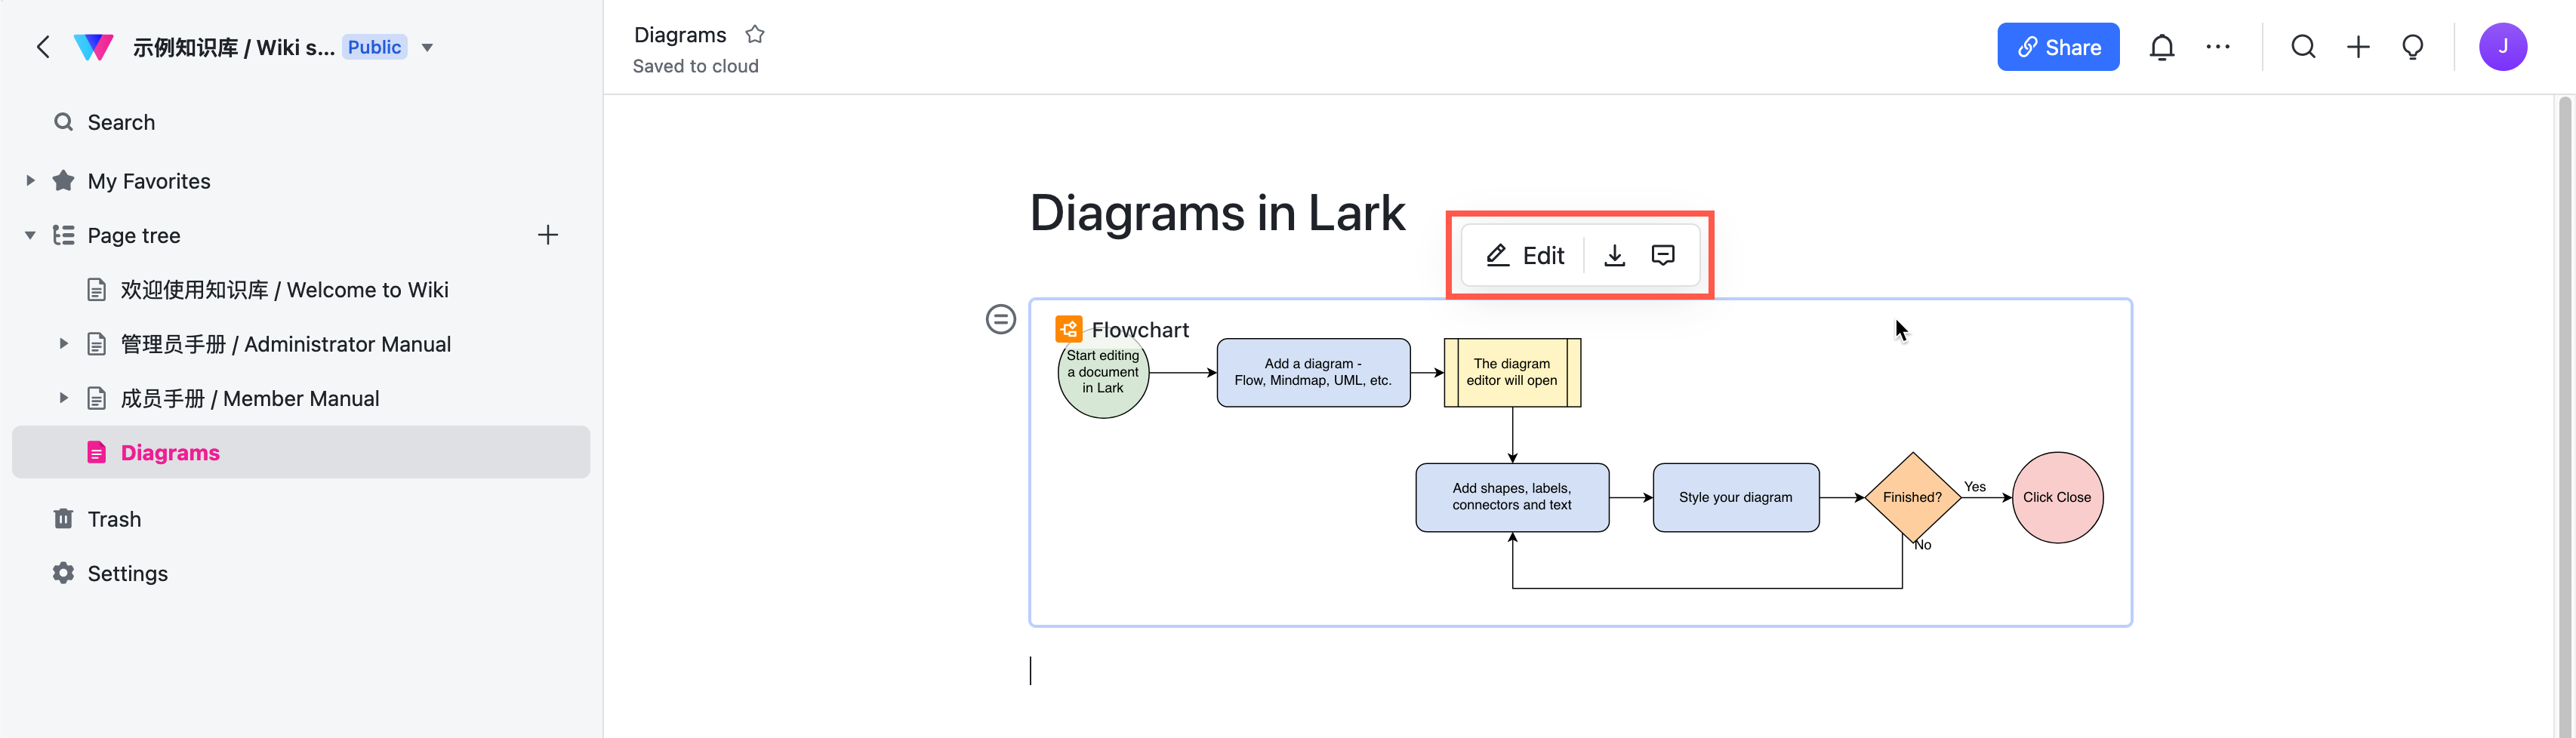 Edit an existing diagram or add comments in Lark via the toolbar that appears above or below the diagram when you hover over it